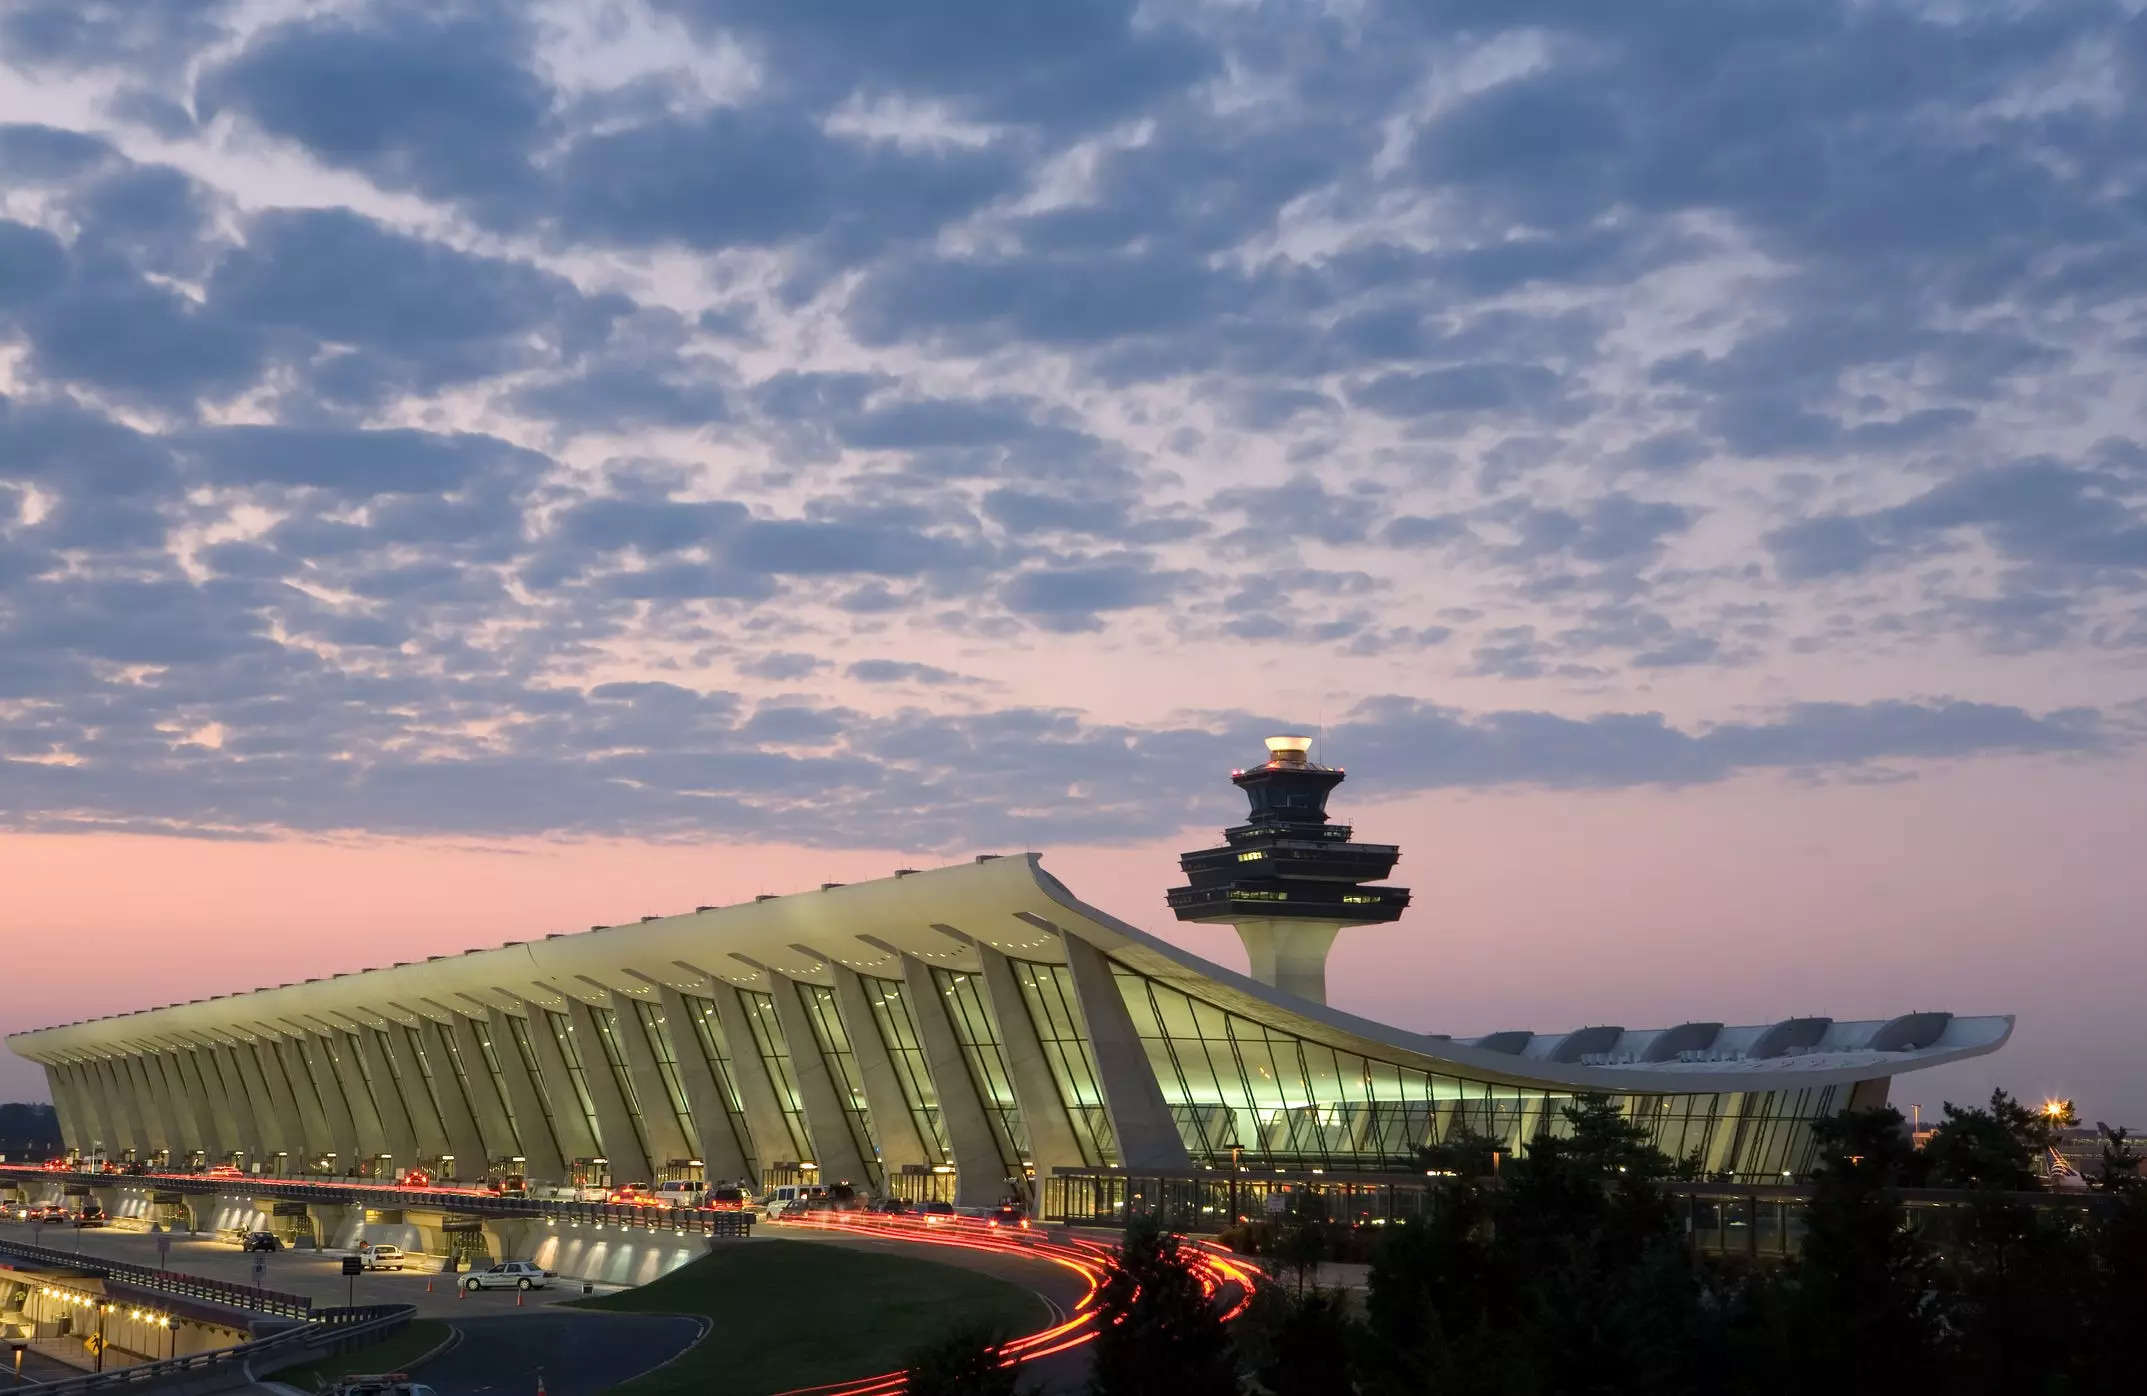 Track The Private Jet Set Here Are The 9 Most Popular Airports For Pjs Business Insider India 